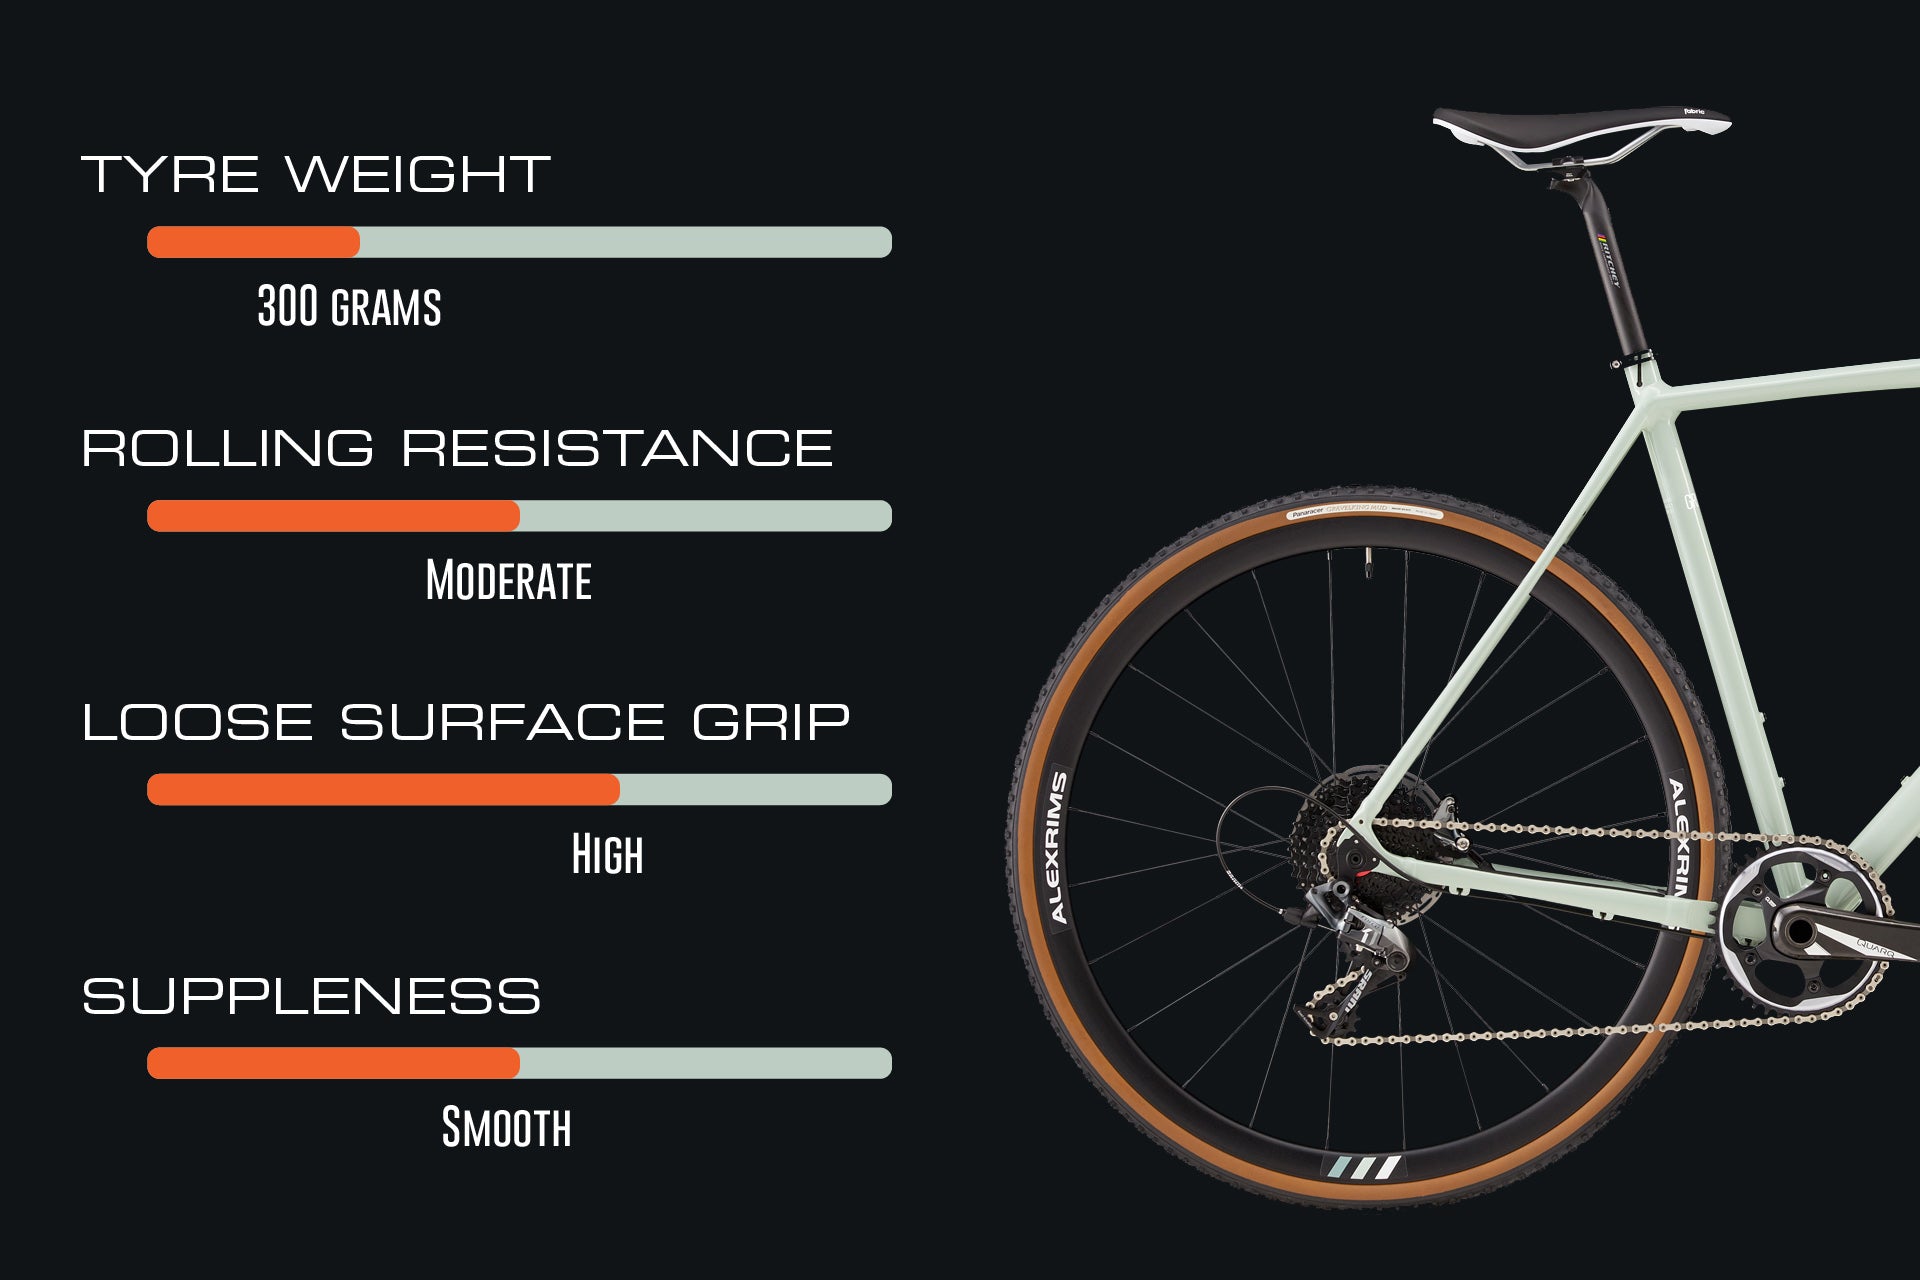 Panaracer gravelKing Mud 700x33 performance and features